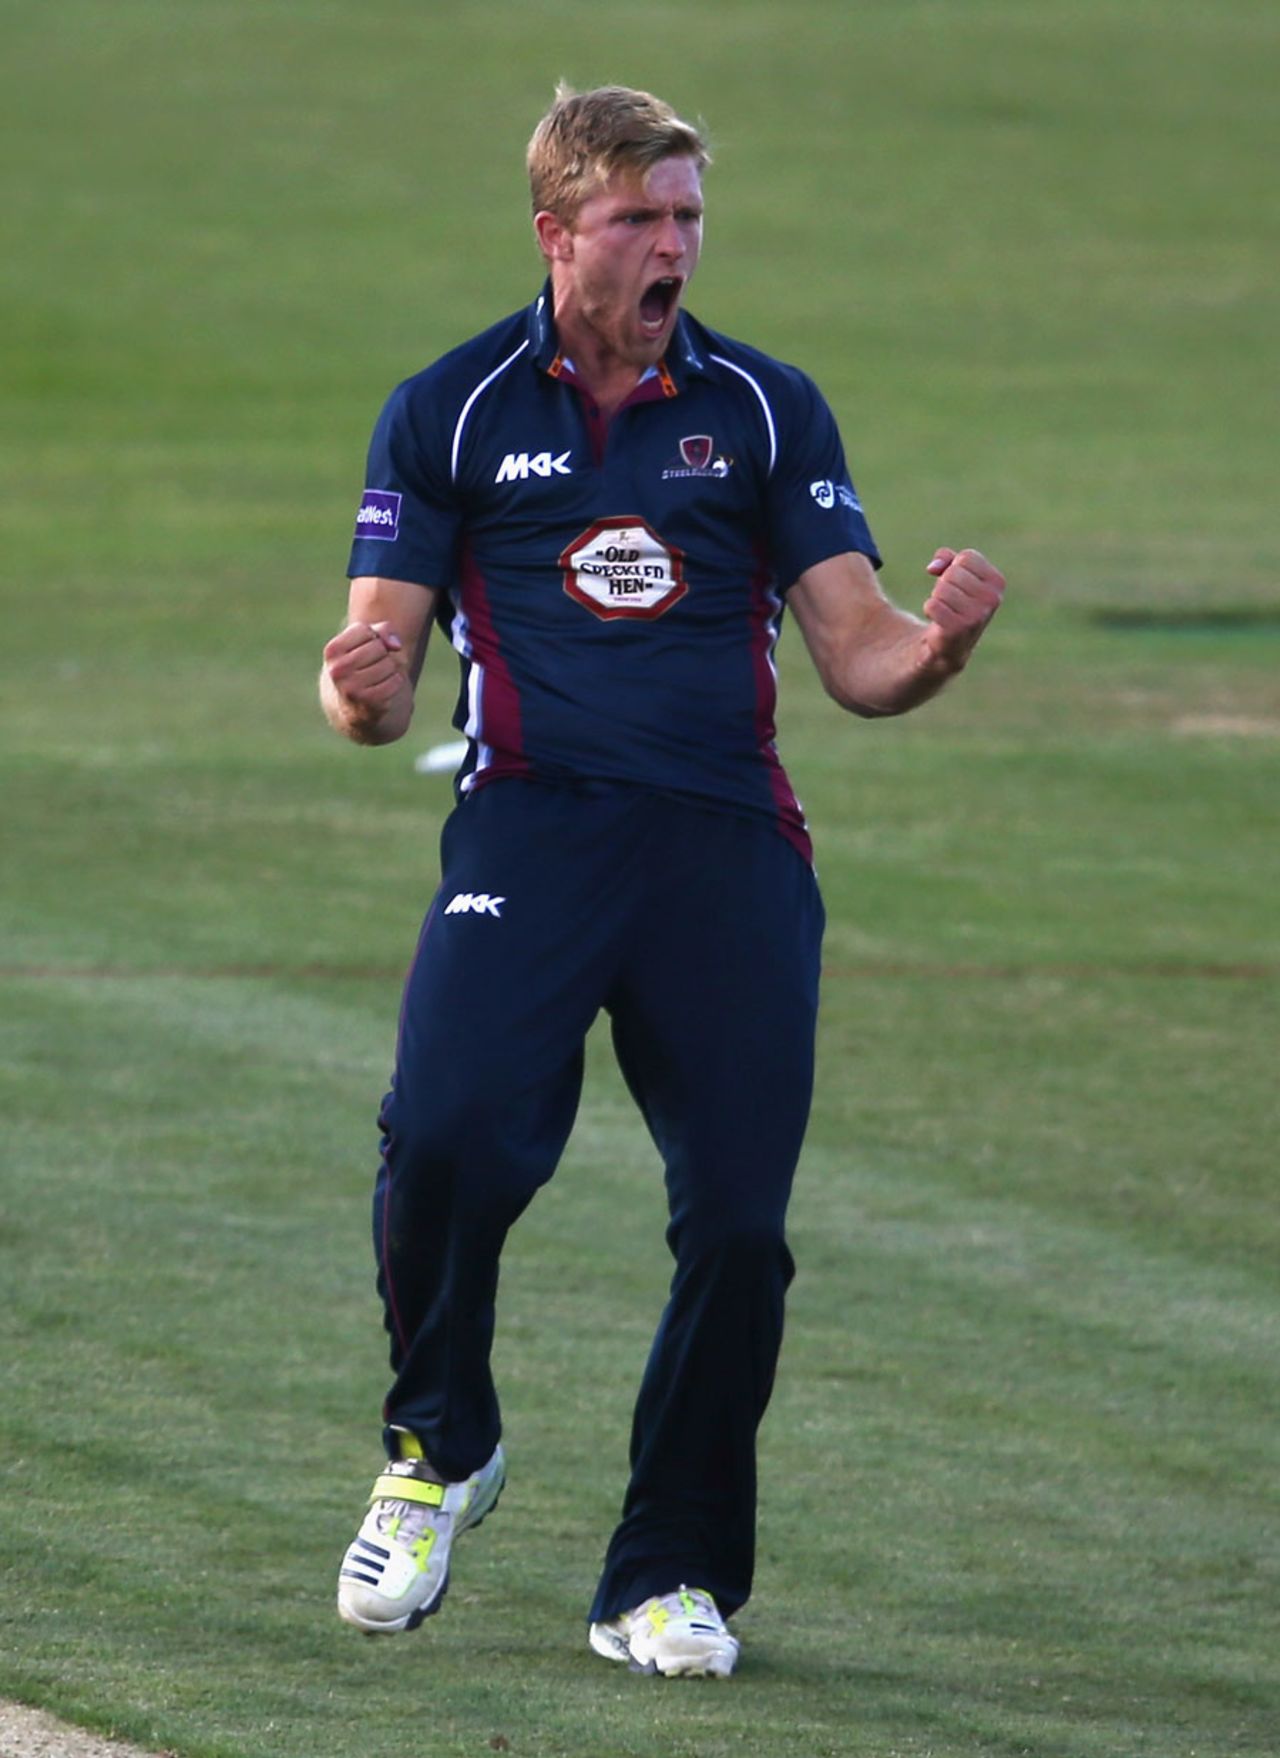 David Willey removed both openers, Northamptonshire v Warwickshire, NatWest T20 Blast, North Division, Wantage Road, July 3, 2014